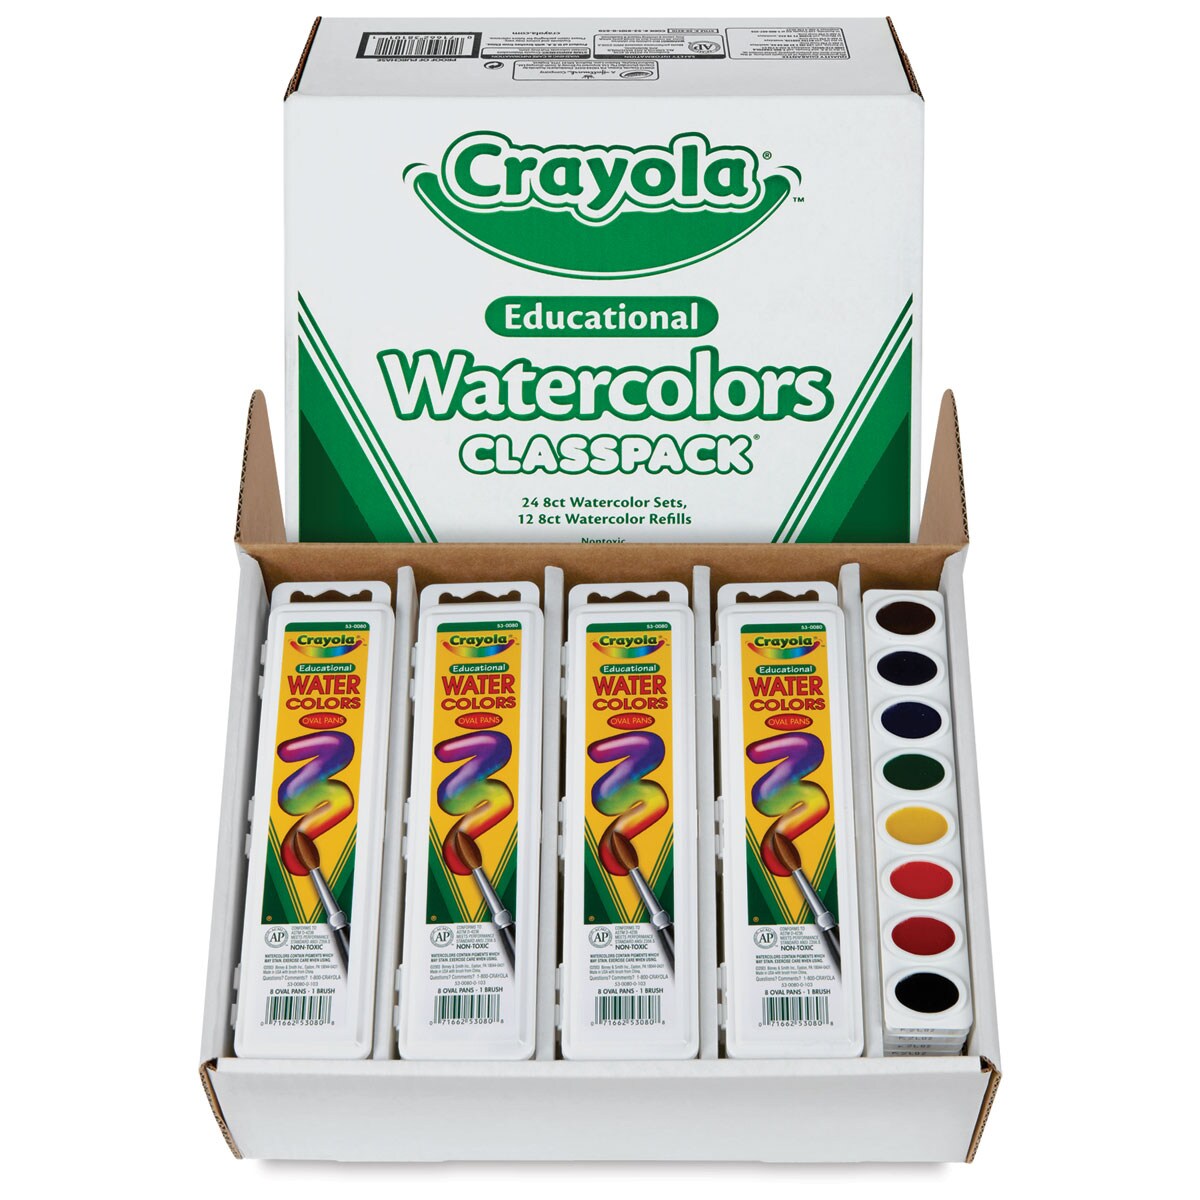 Crayola Educational Watercolor Pans - Oval, Set of 36, Pans